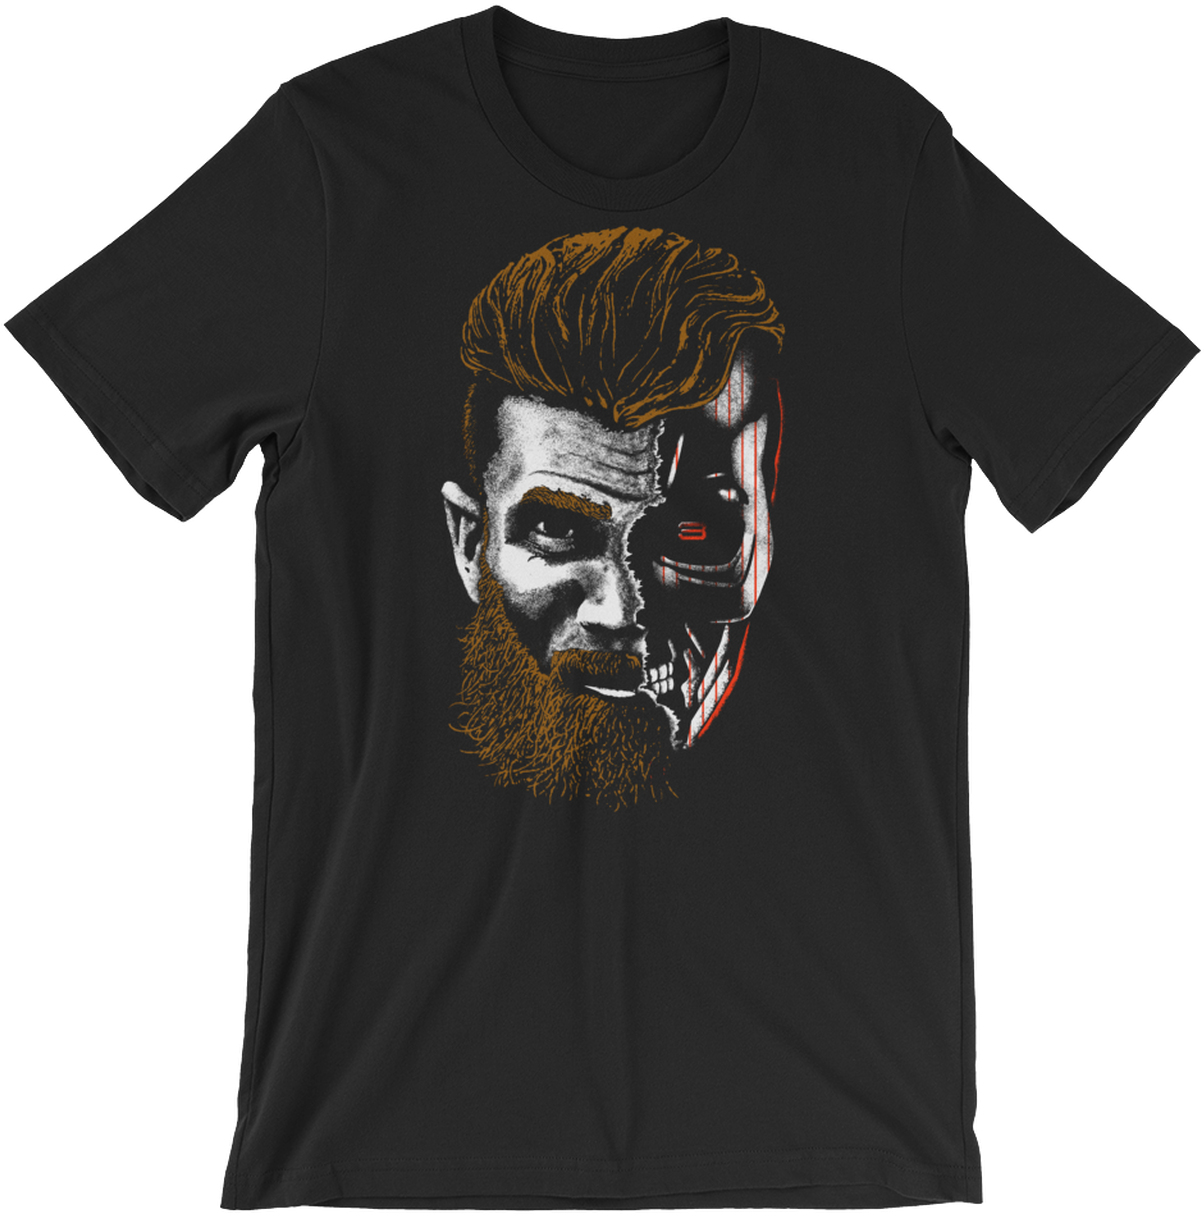 A Black T-shirt With A Face And Beard